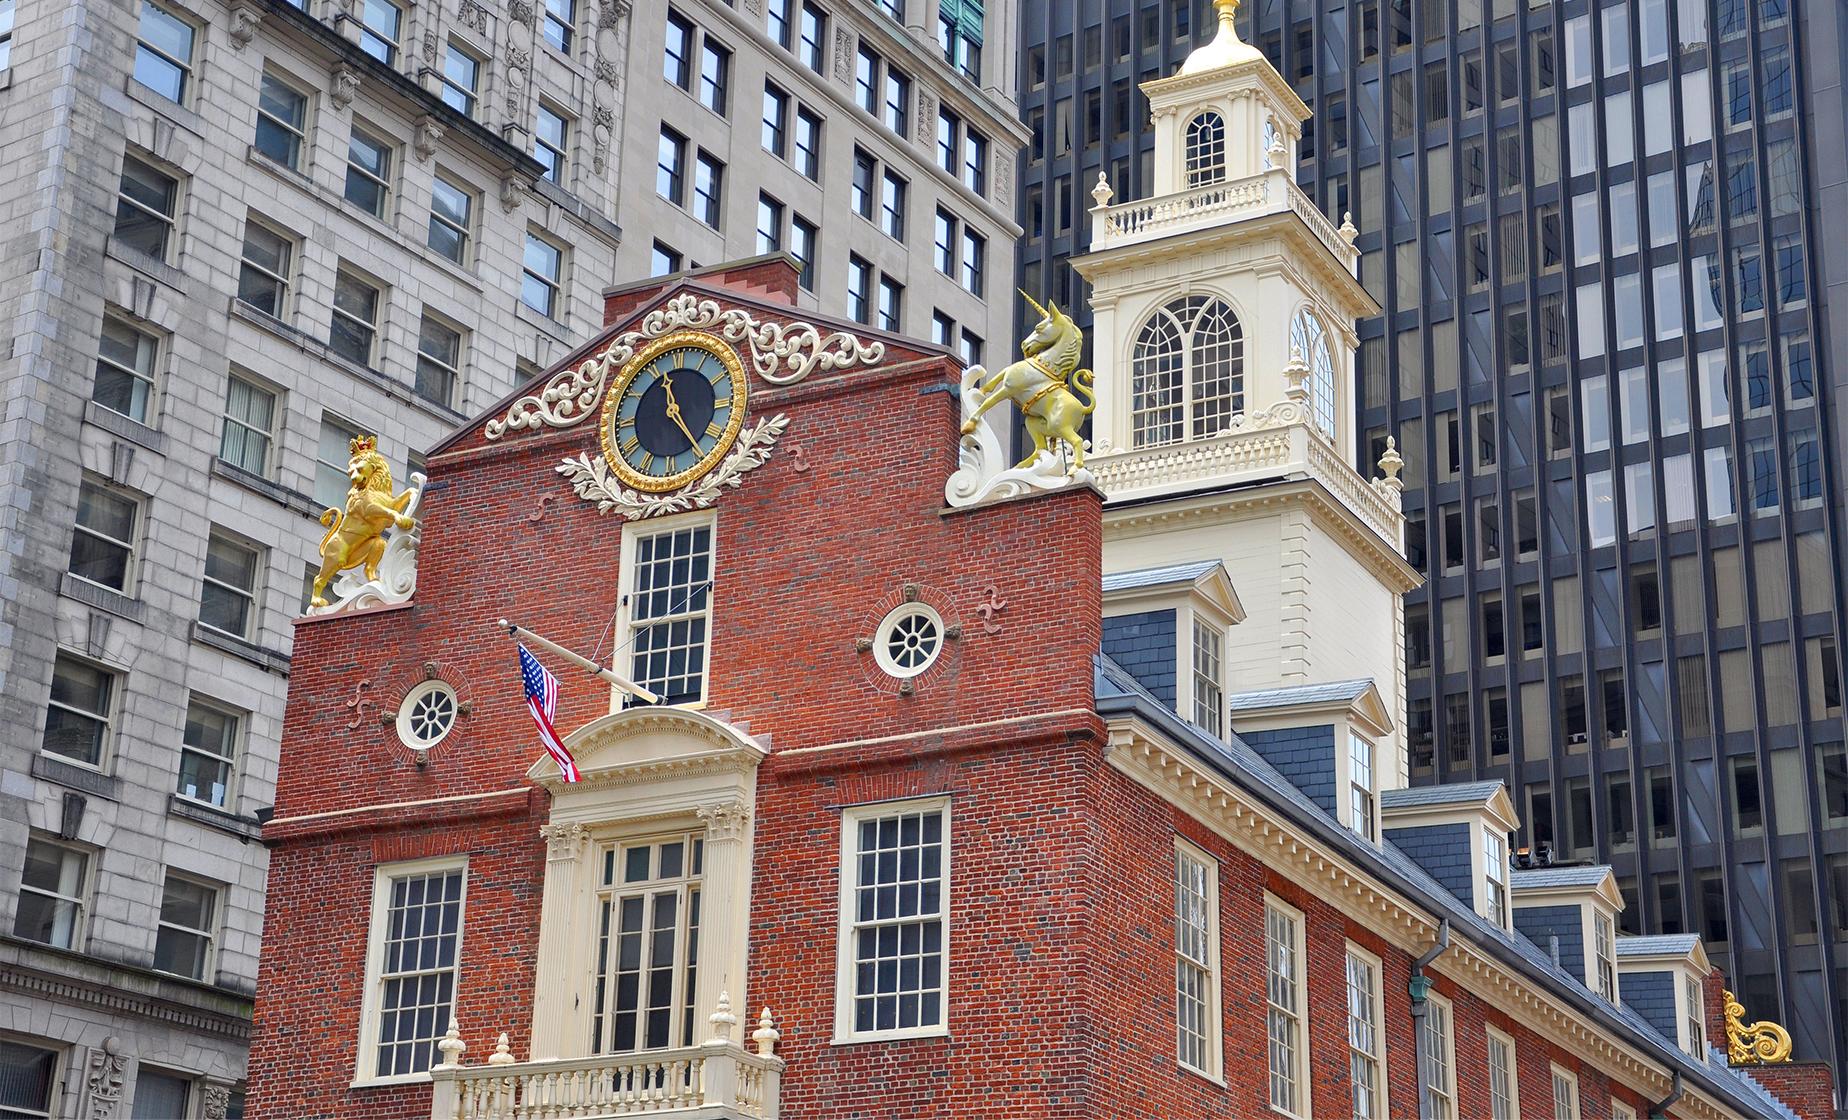 History and Architecture Walking Tour of Boston Freedom Trail (Old City Hall, Old Corner Bookstore)